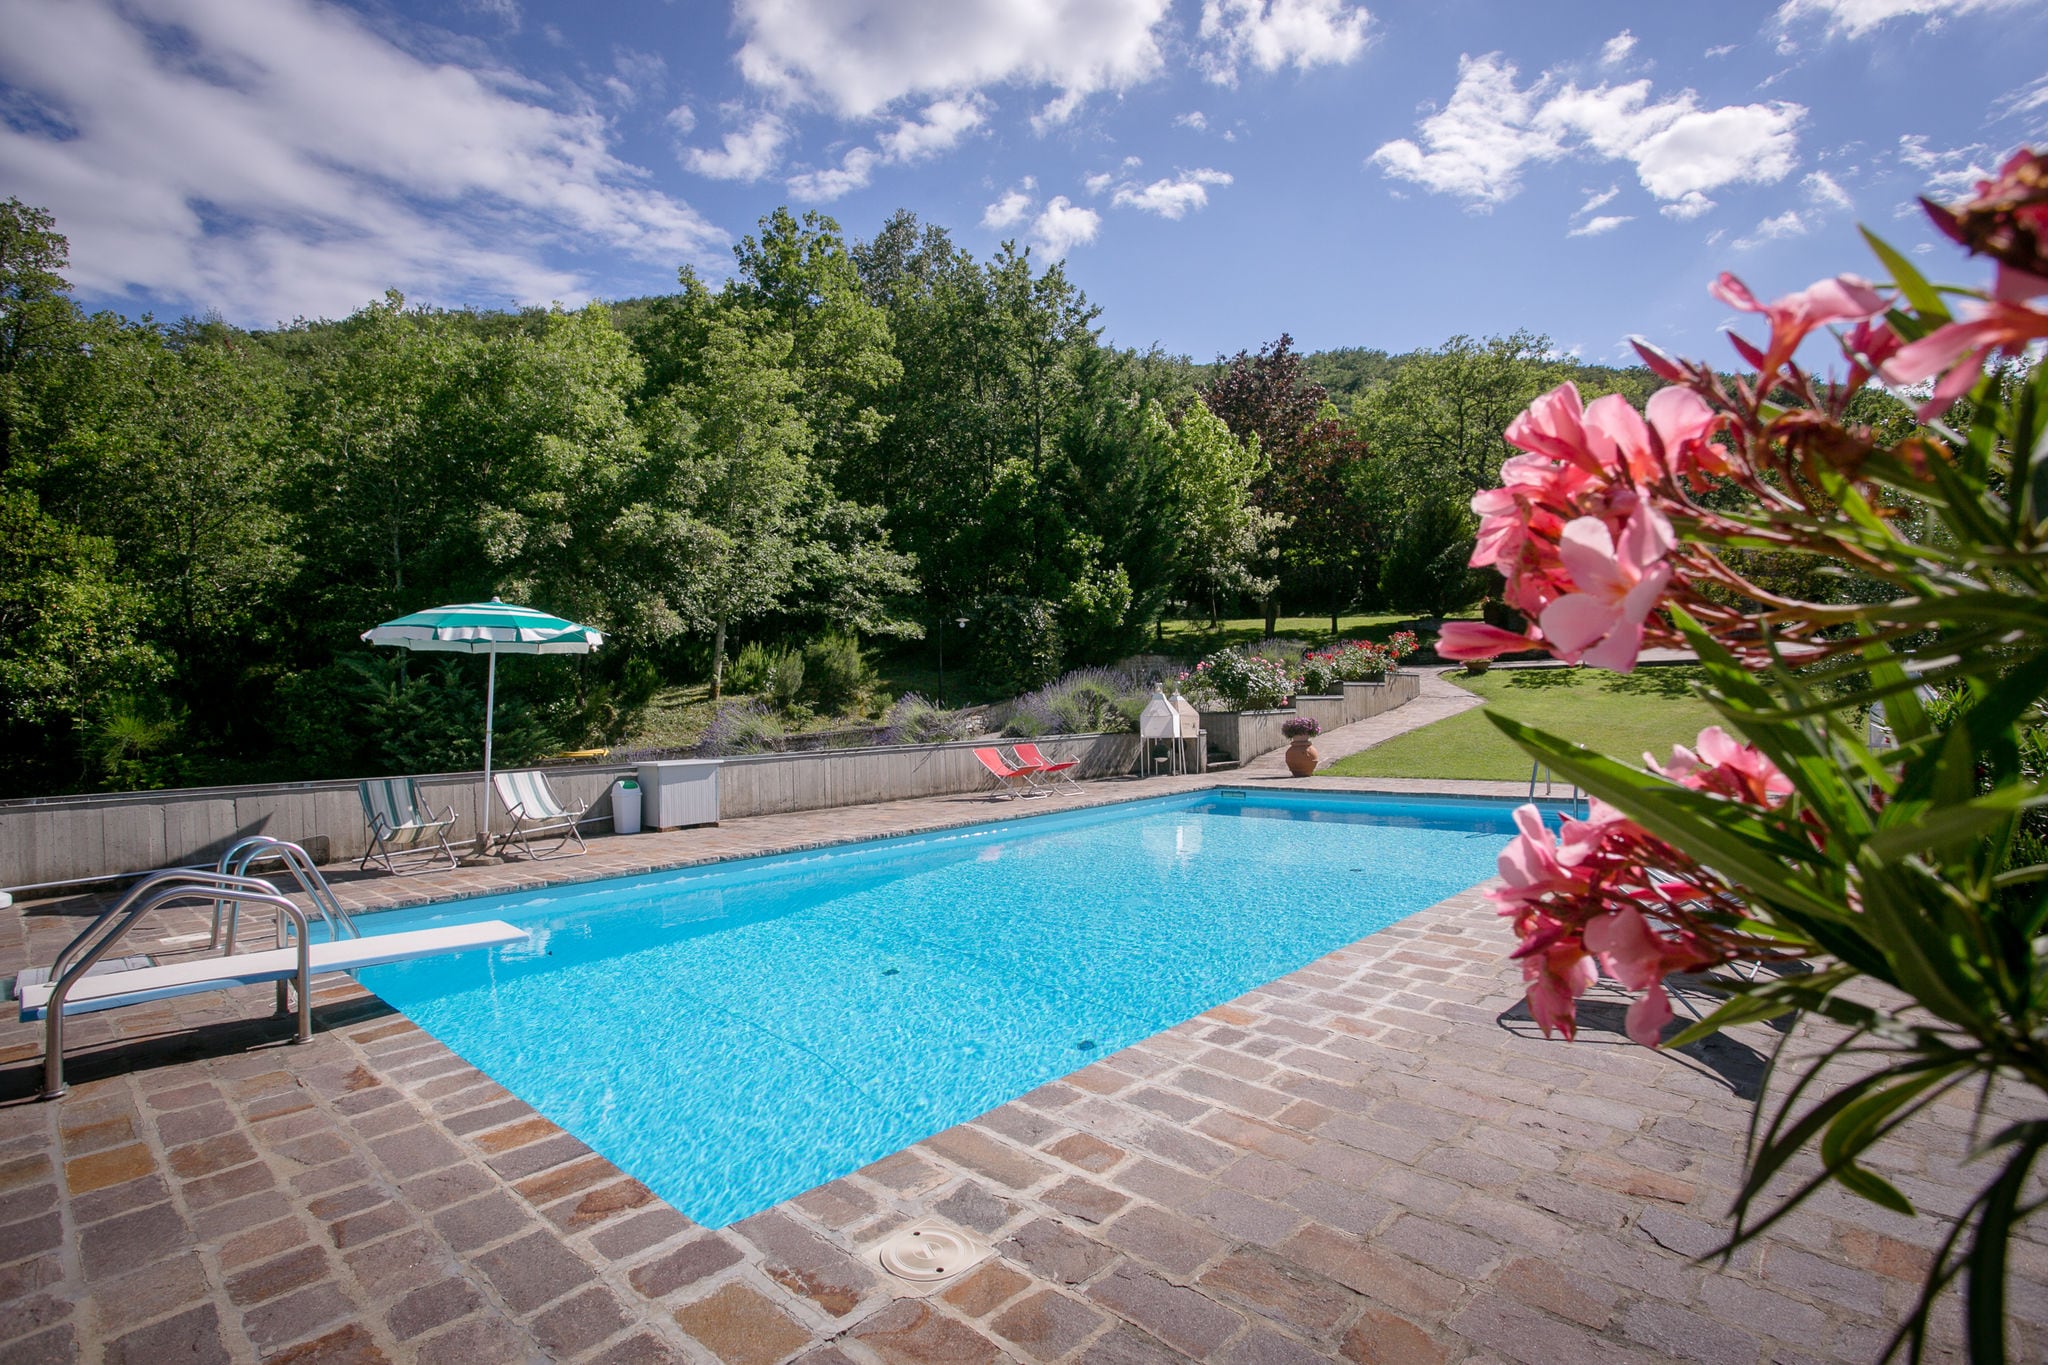 Villa on a hill with private pool, nice view, pizza oven and barbecue